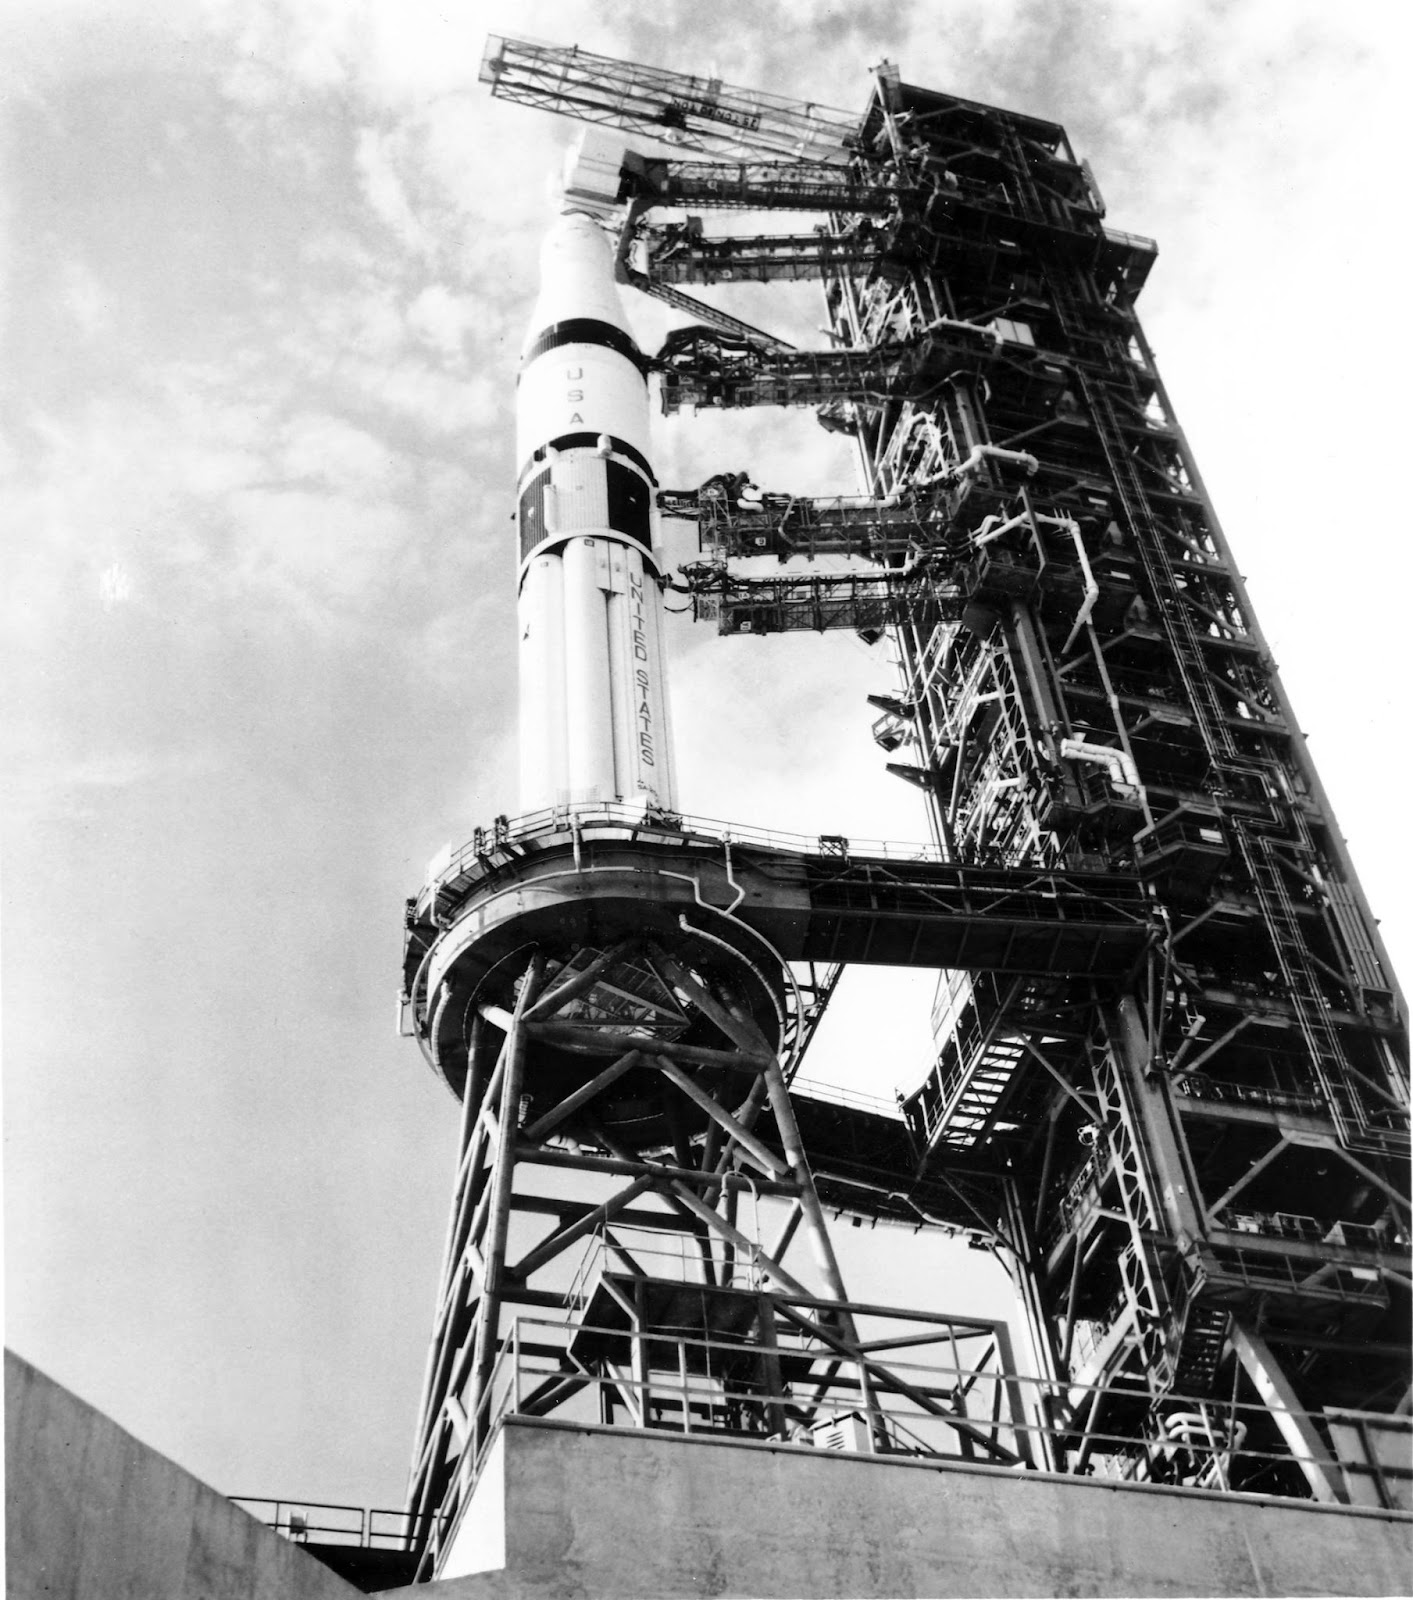 The Saturn V Rocket was developed with help from Chrysler, well before SpaceX